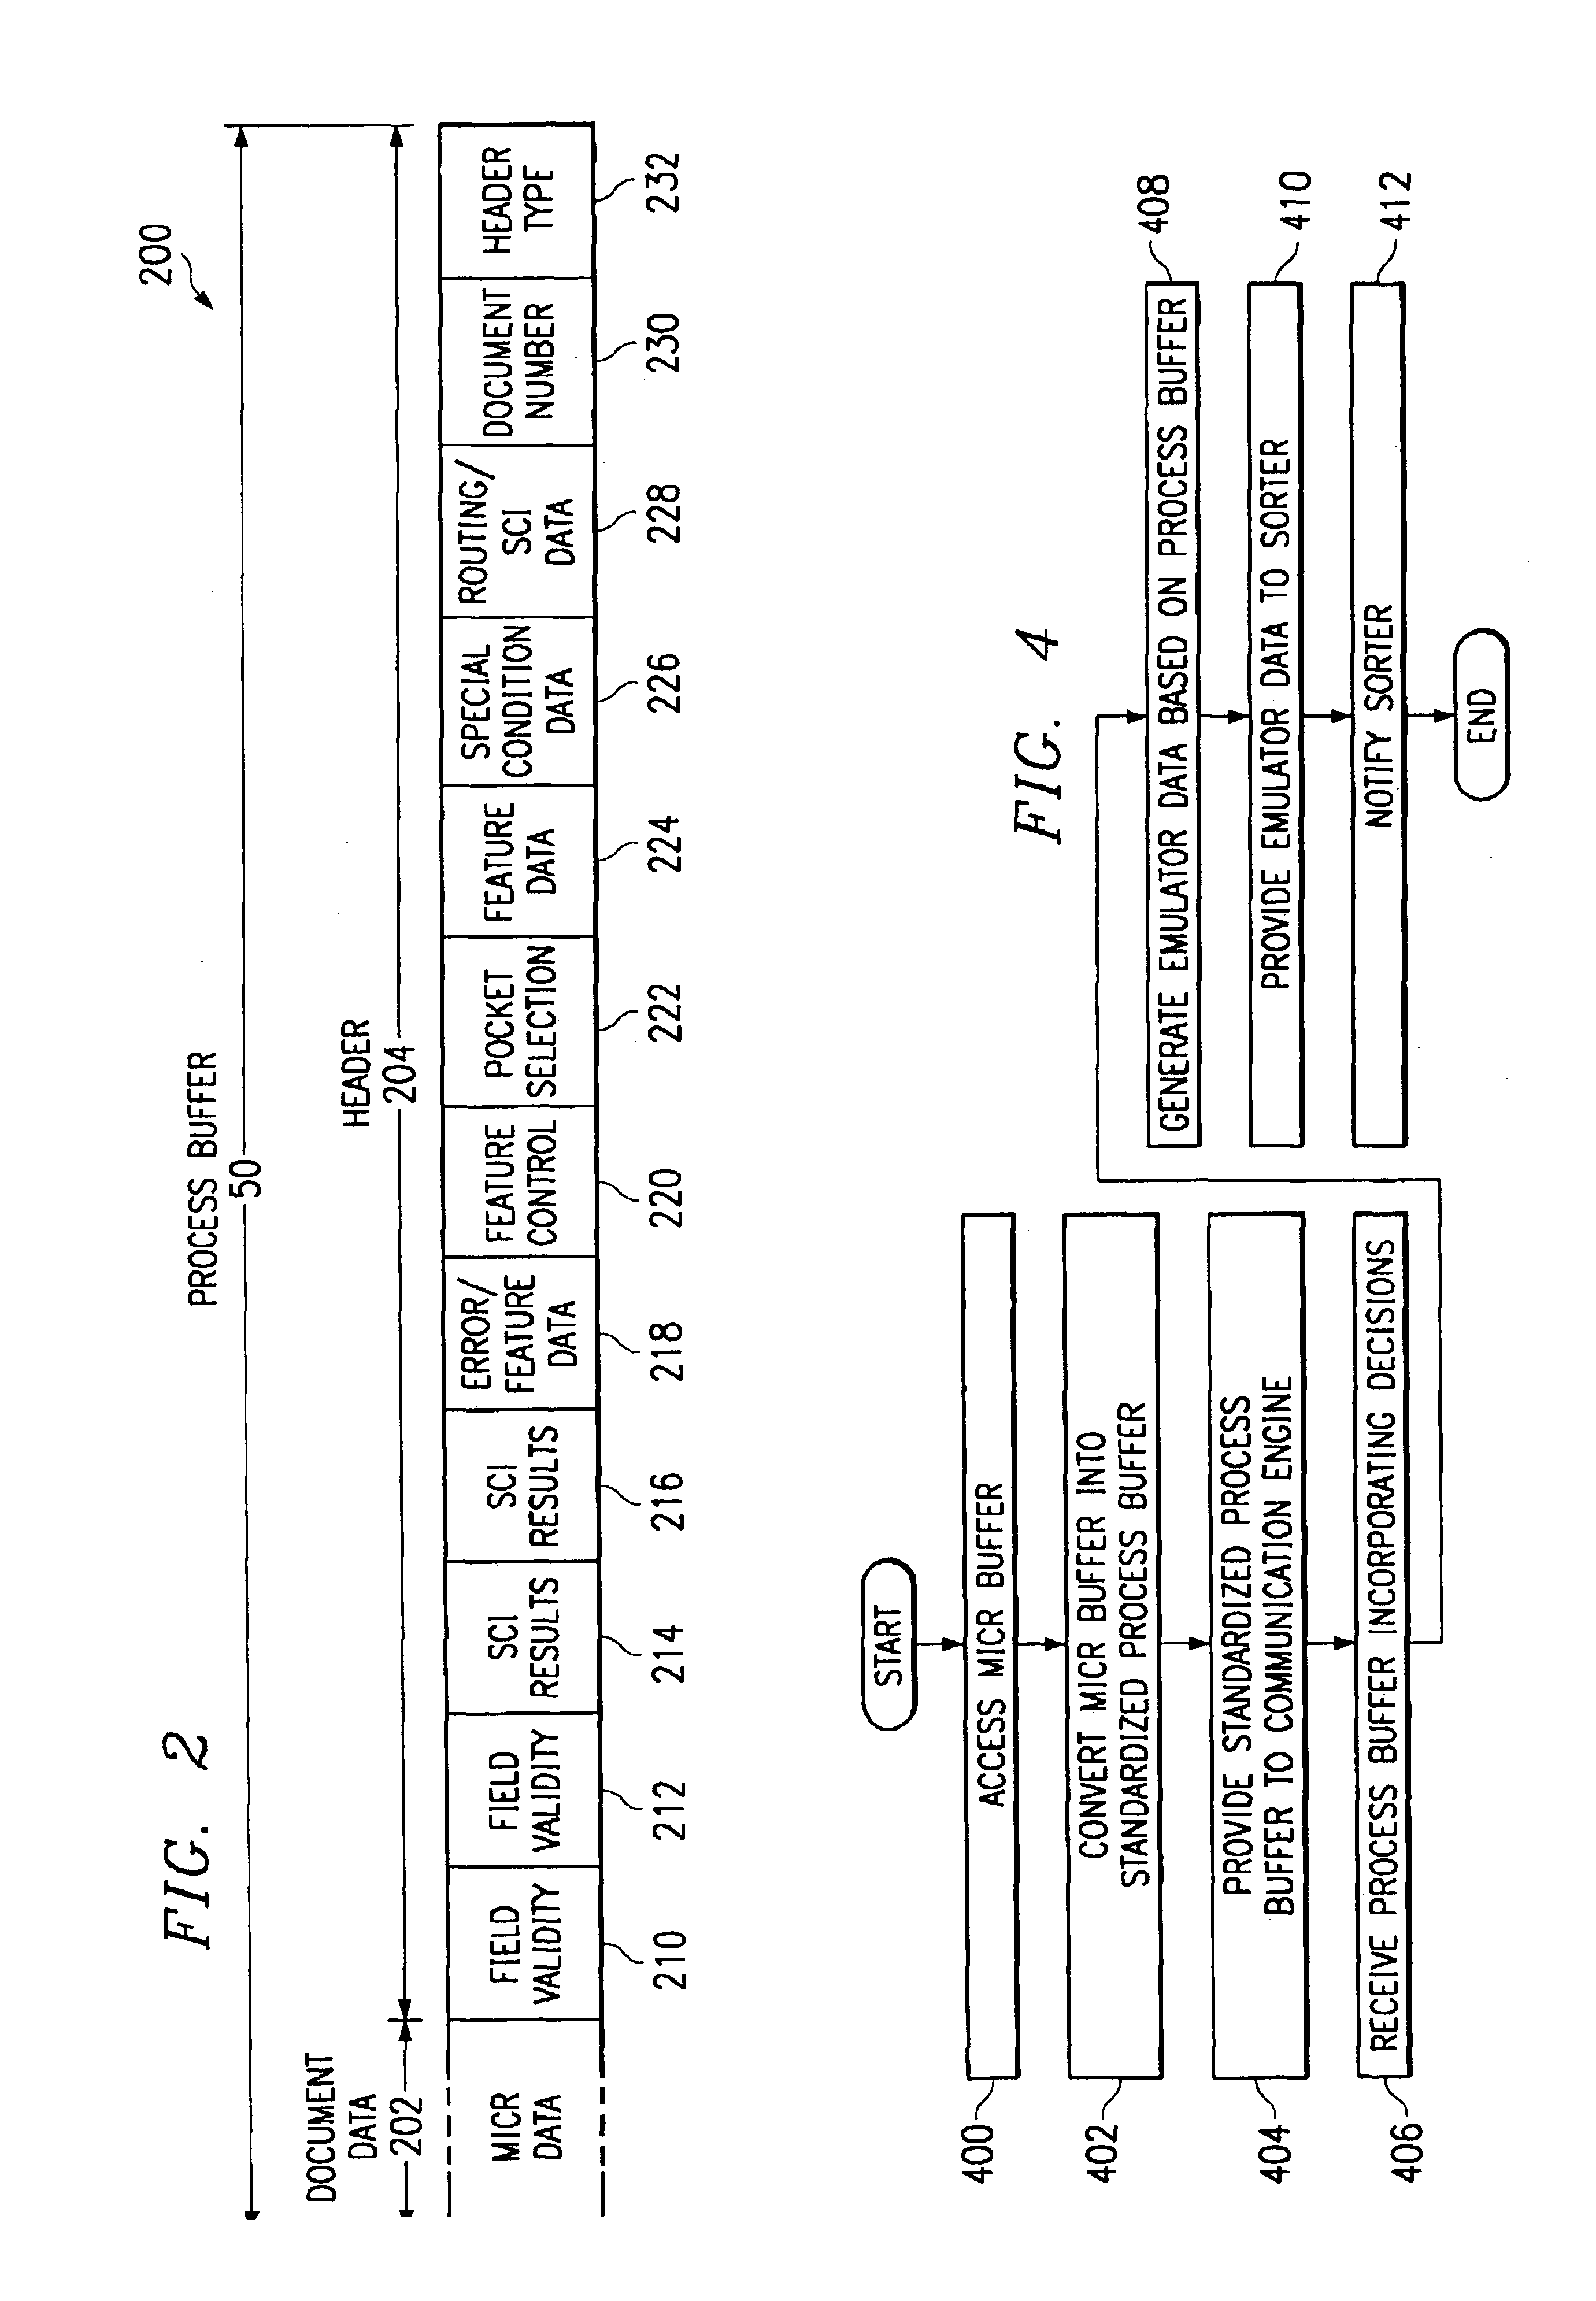 Method and system for online communication between a check sorter and a check processing system